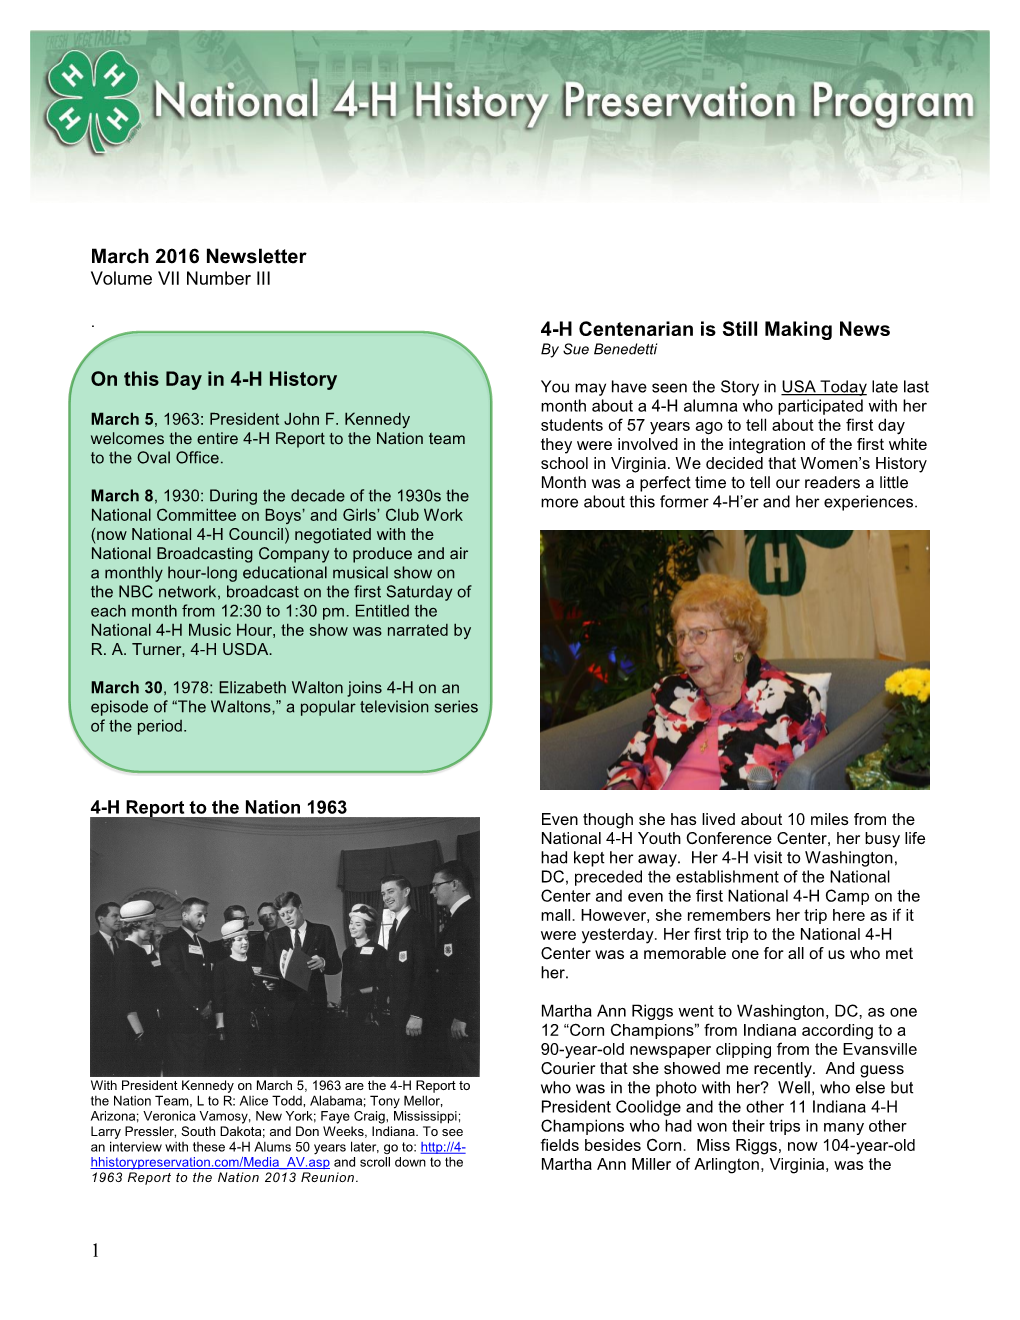 1 March 2016 Newsletter on This Day in 4-H History 4-H Centenarian Is